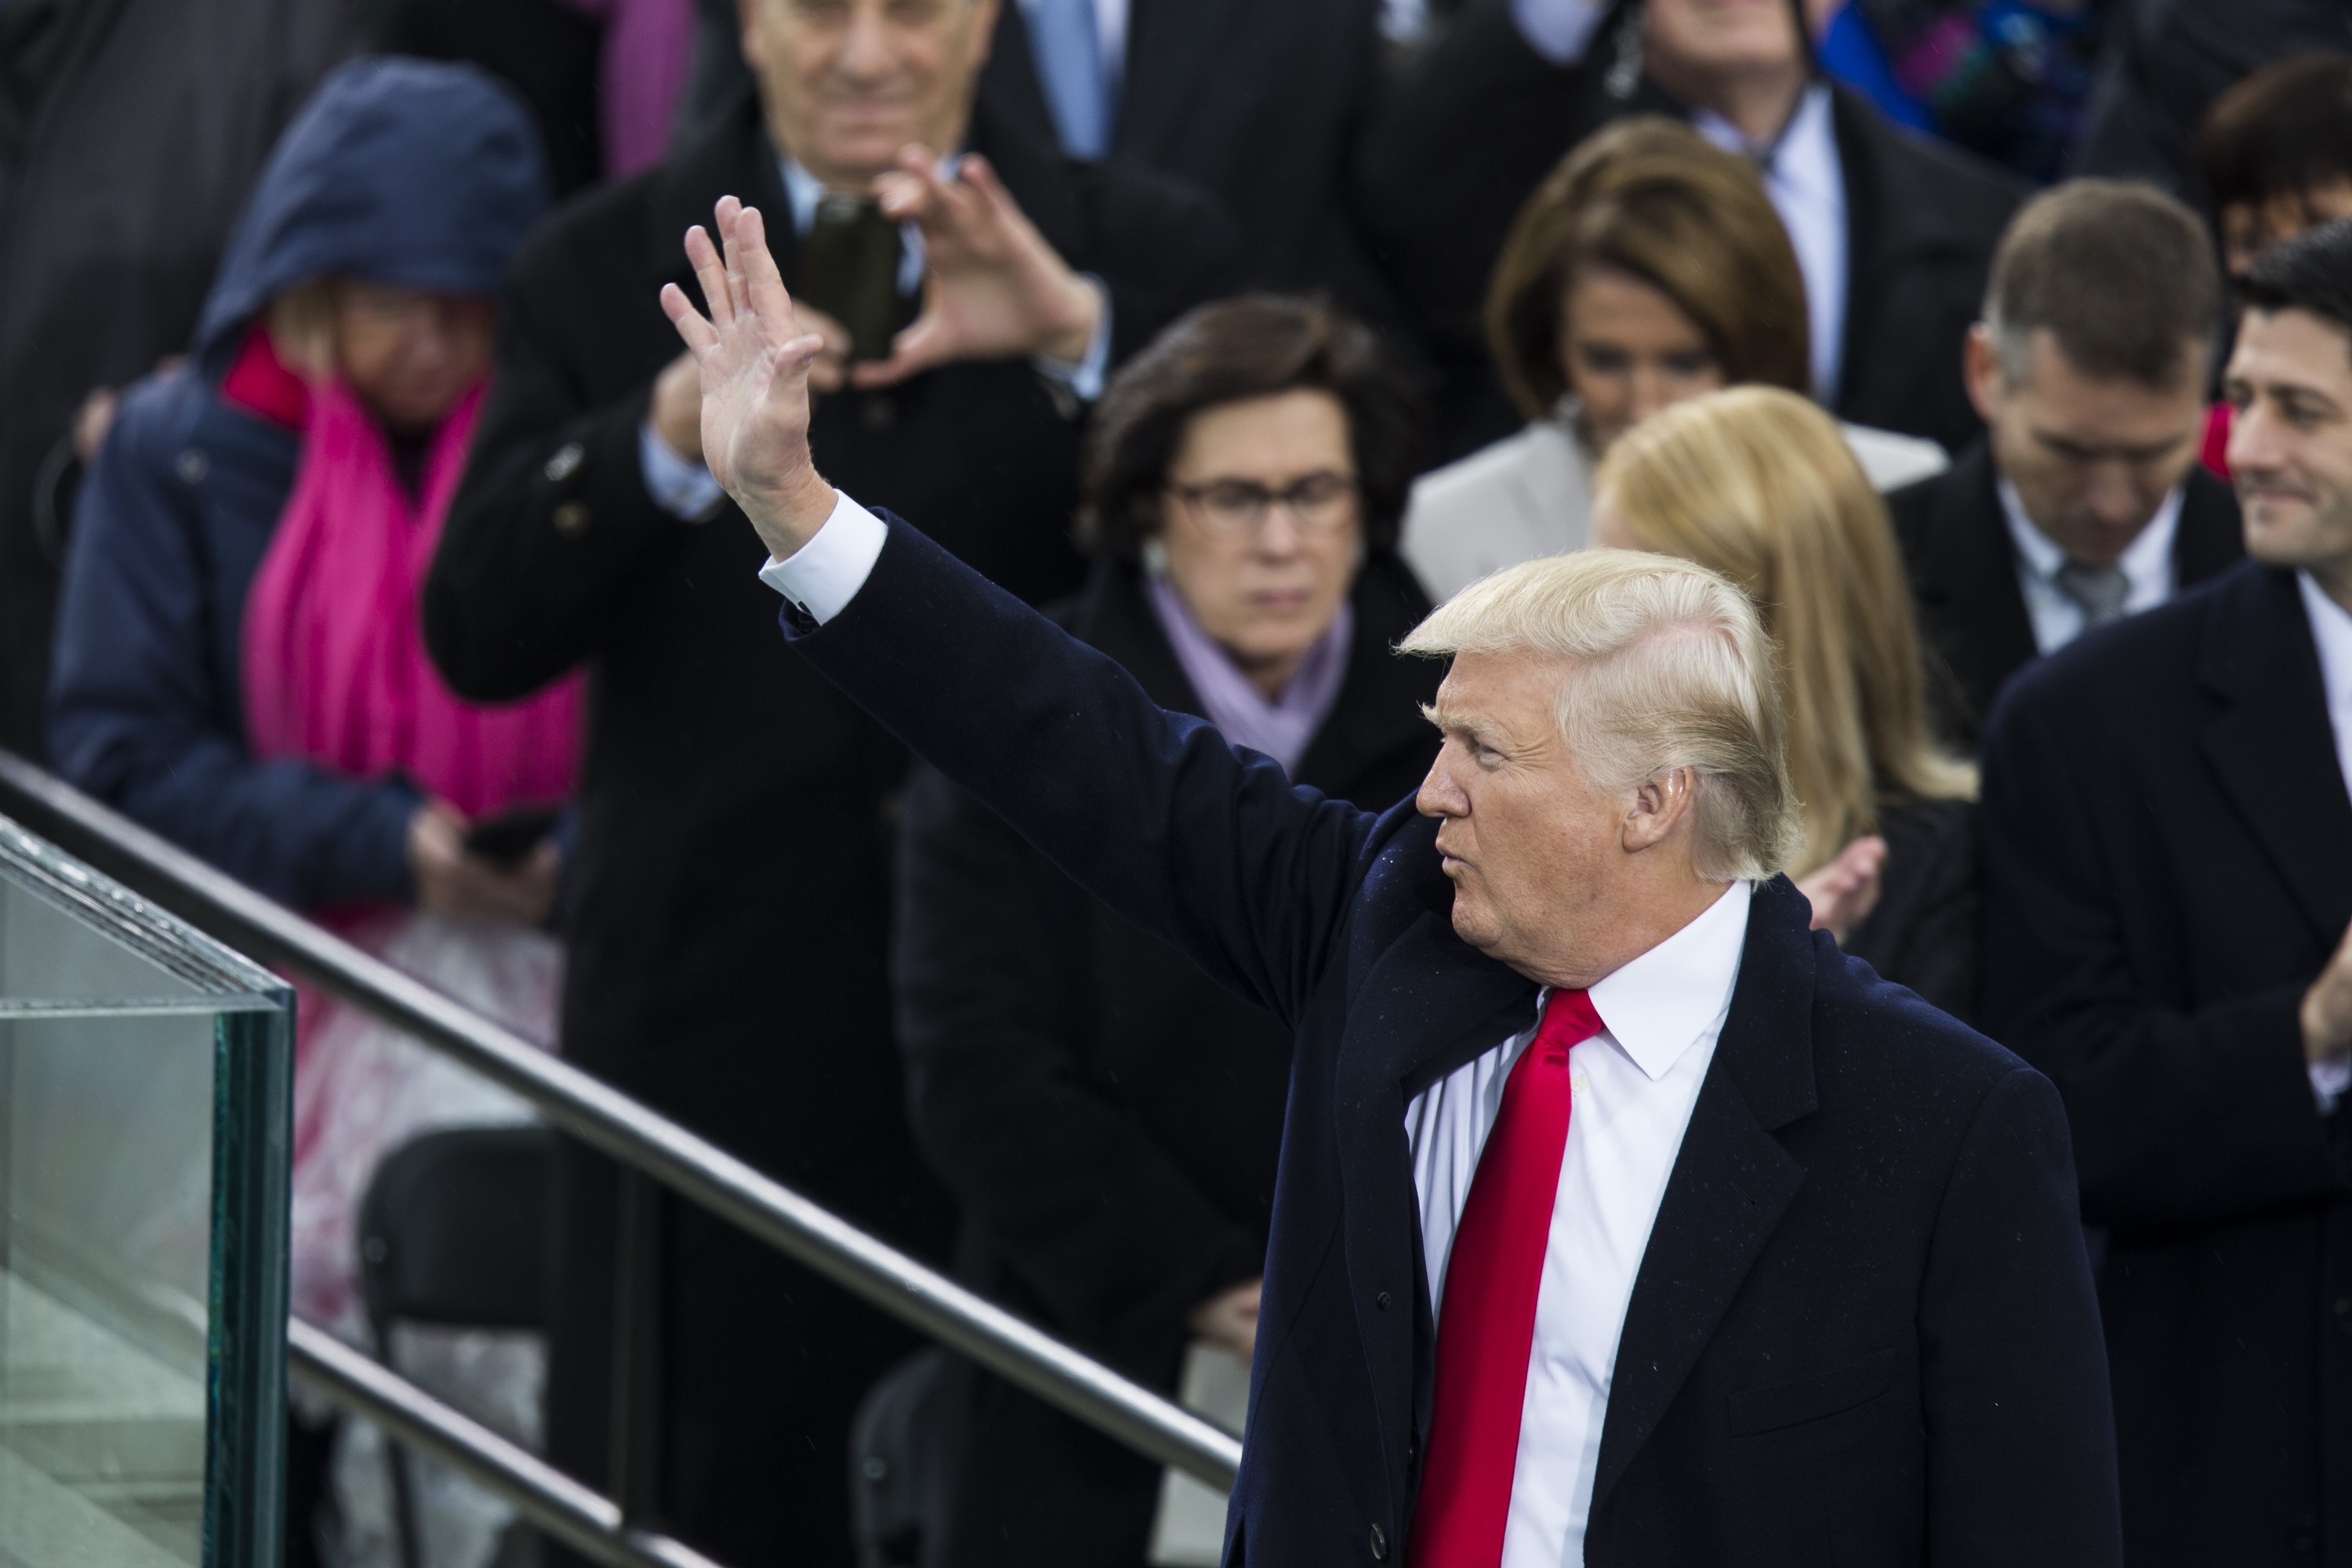 WASHINGTON, USA - JANUARY 20: President Donald Trump waves to the crowds during the 58th U.S. Presidential Inauguration after he was sworn in as the 45th President of the United States of America in Washington, USA on January 20, 2017. (Anadolu Agency—Getty Images)